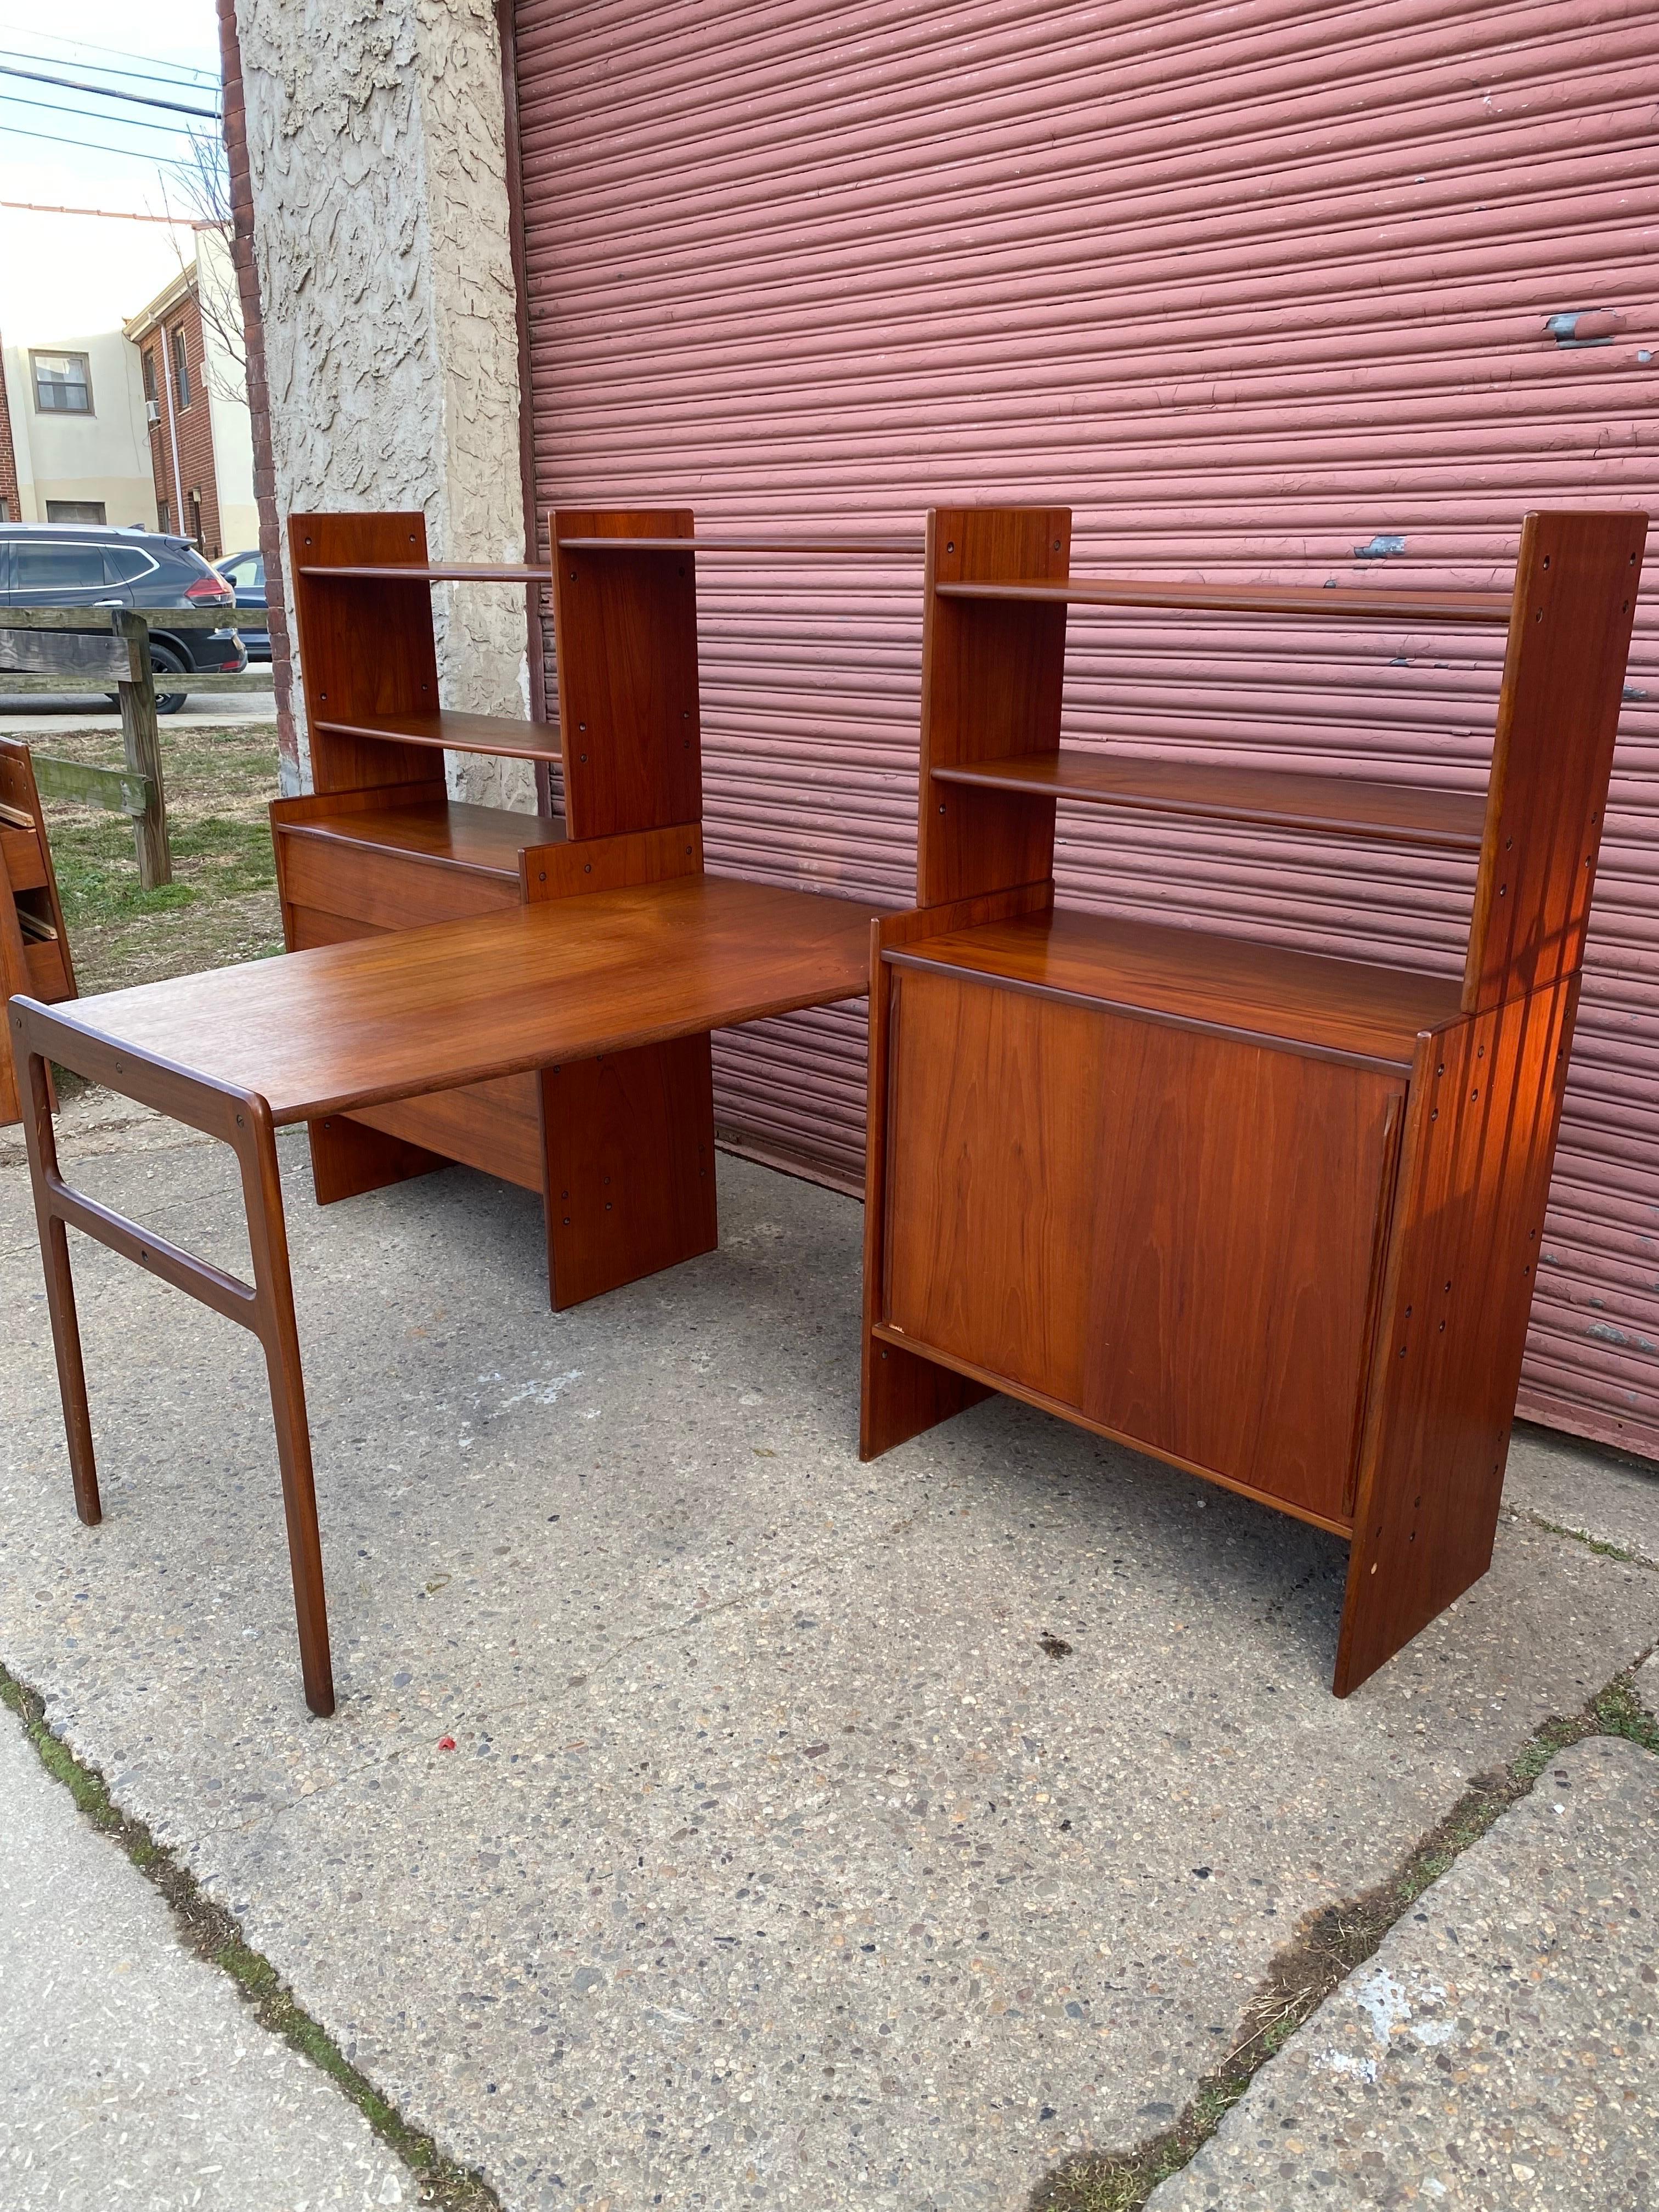 Danish Modern Modular Desk and Shelf System. Can be used in multiple ways, with or without the Desk Surface! All the main pieces come apart for easy transporting and carrying into tight spaces. Teak is all original with a couple minor flaws as seen